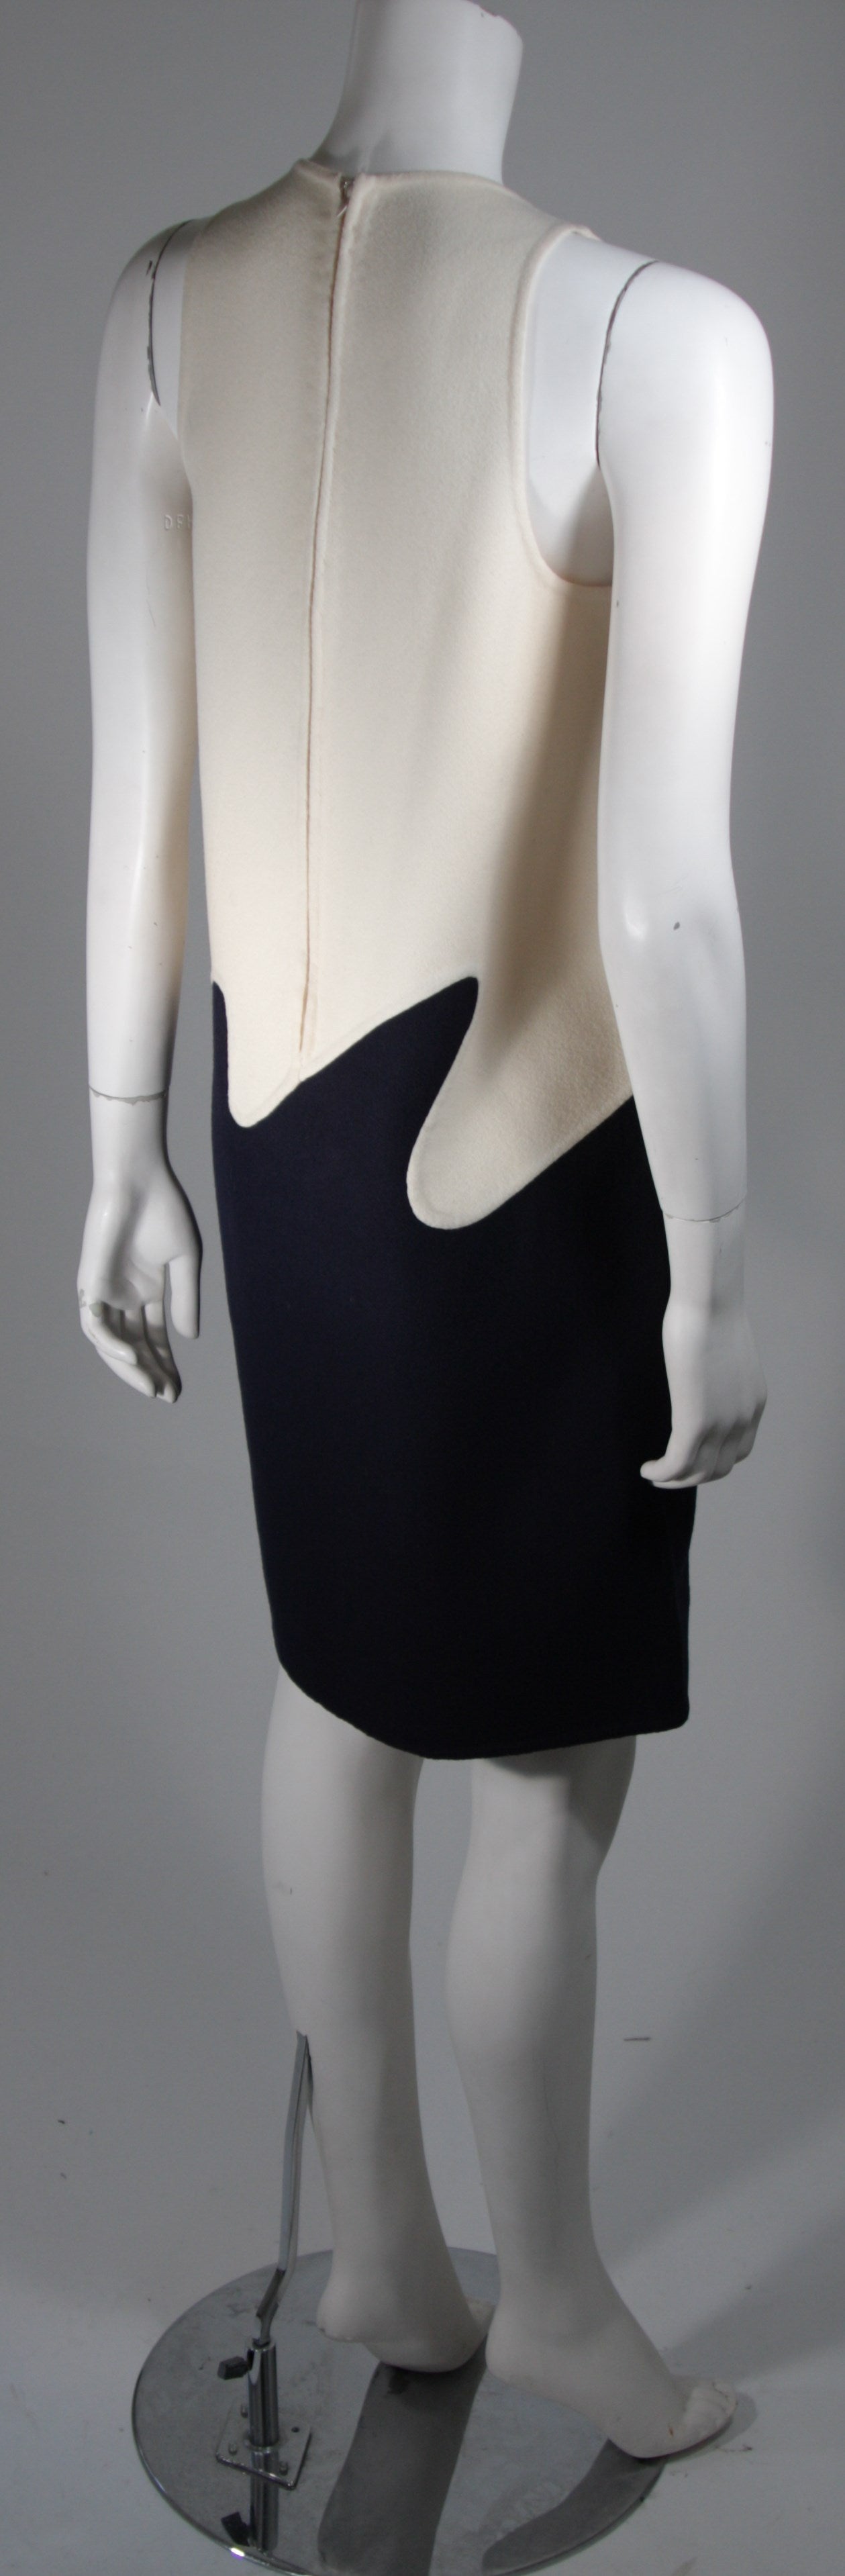 Women's 1960's Cream and Navy Wool 'Wave' Dress Size Small For Sale